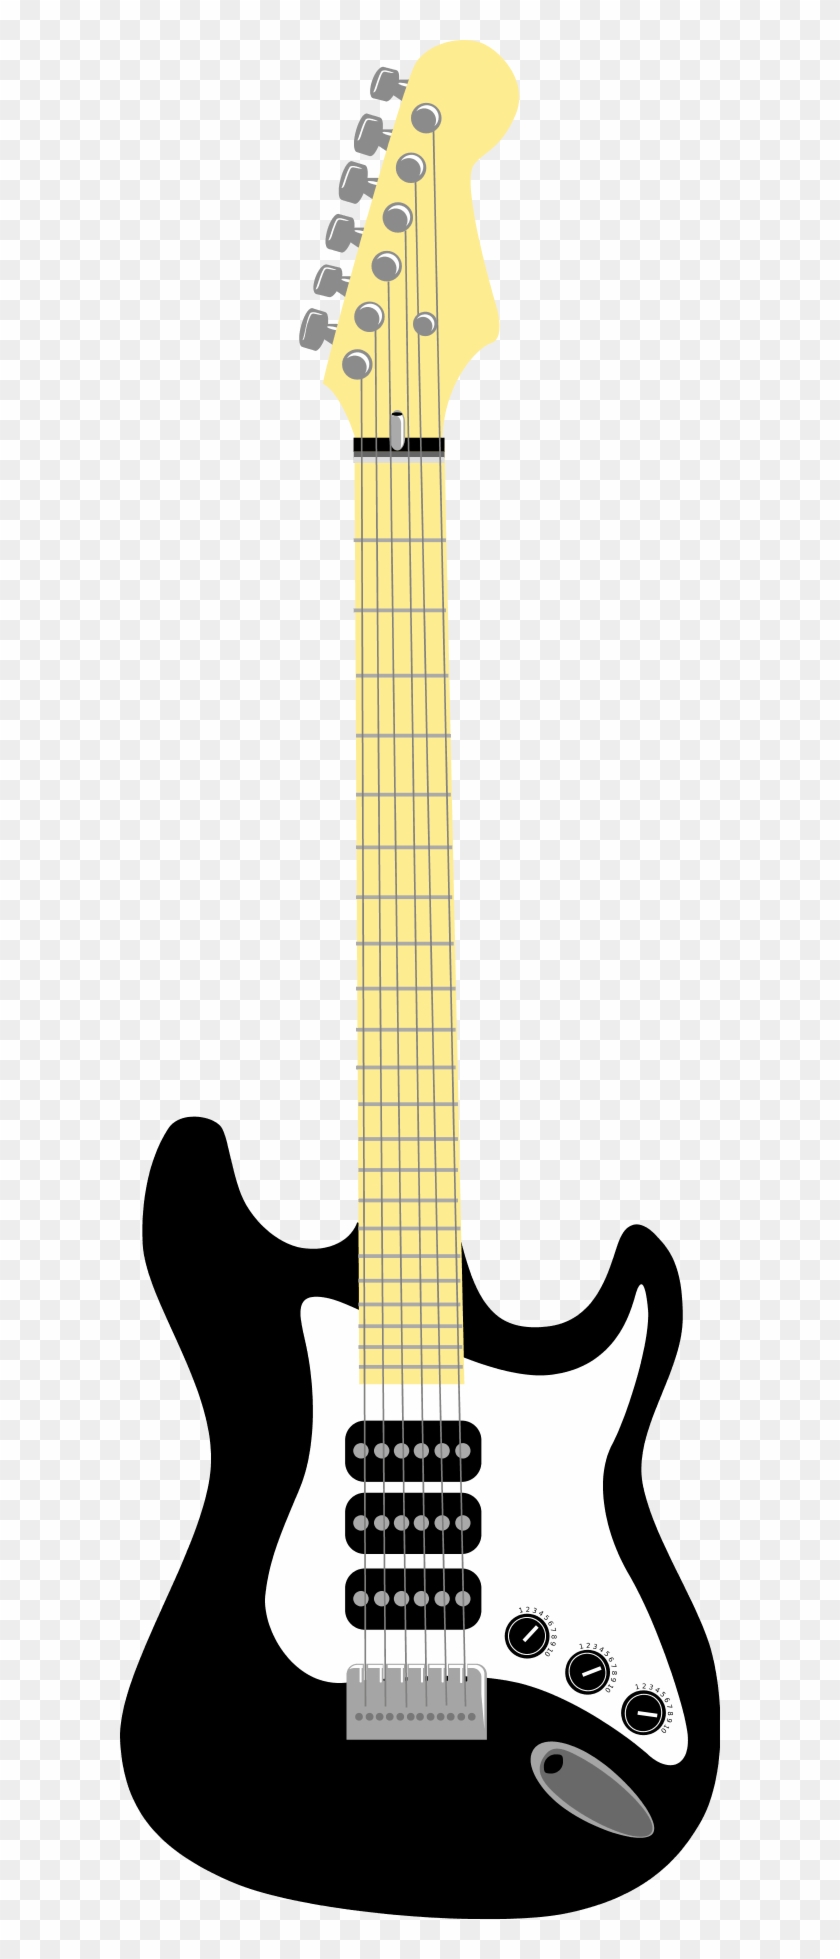 Electric Guitar Clipart - White And Black Guitar #583573